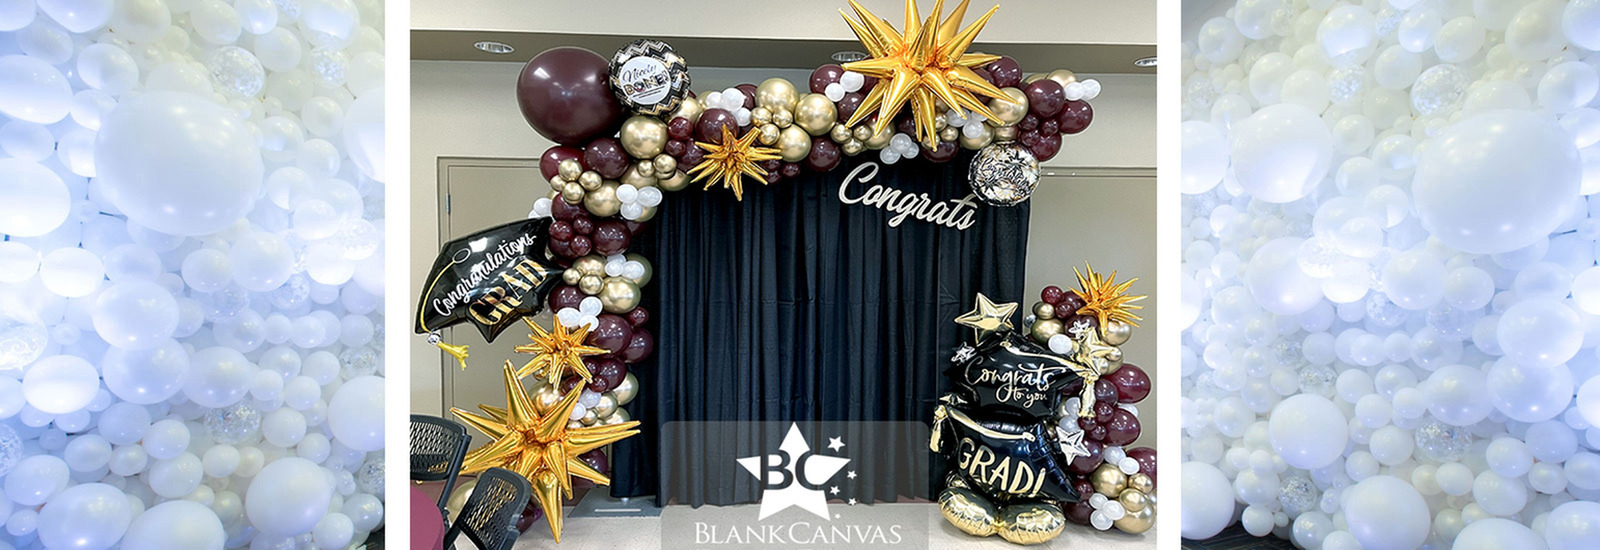 Graduation Organic Balloon Garland with Backdrop, Graduation Cap Balloon Sculpture and Congrats foils in burgundy, gold and white for FIT Graduation